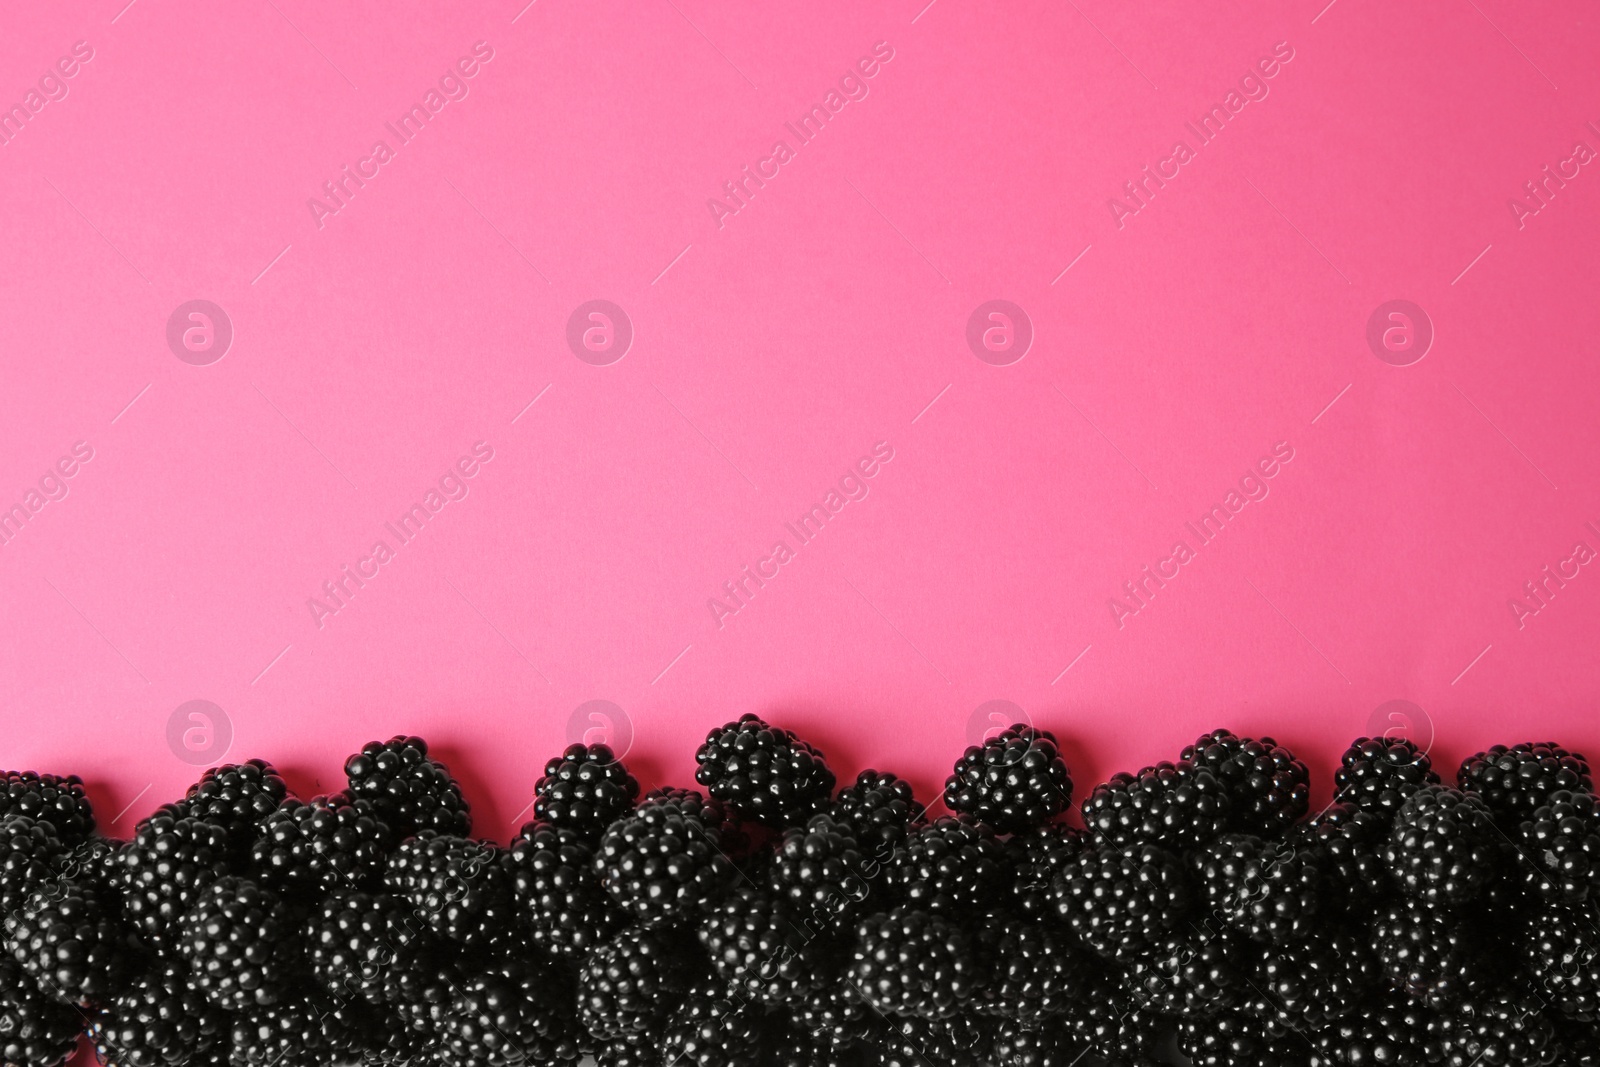 Photo of Flat lay composition with ripe blackberries on pink background. Space for text